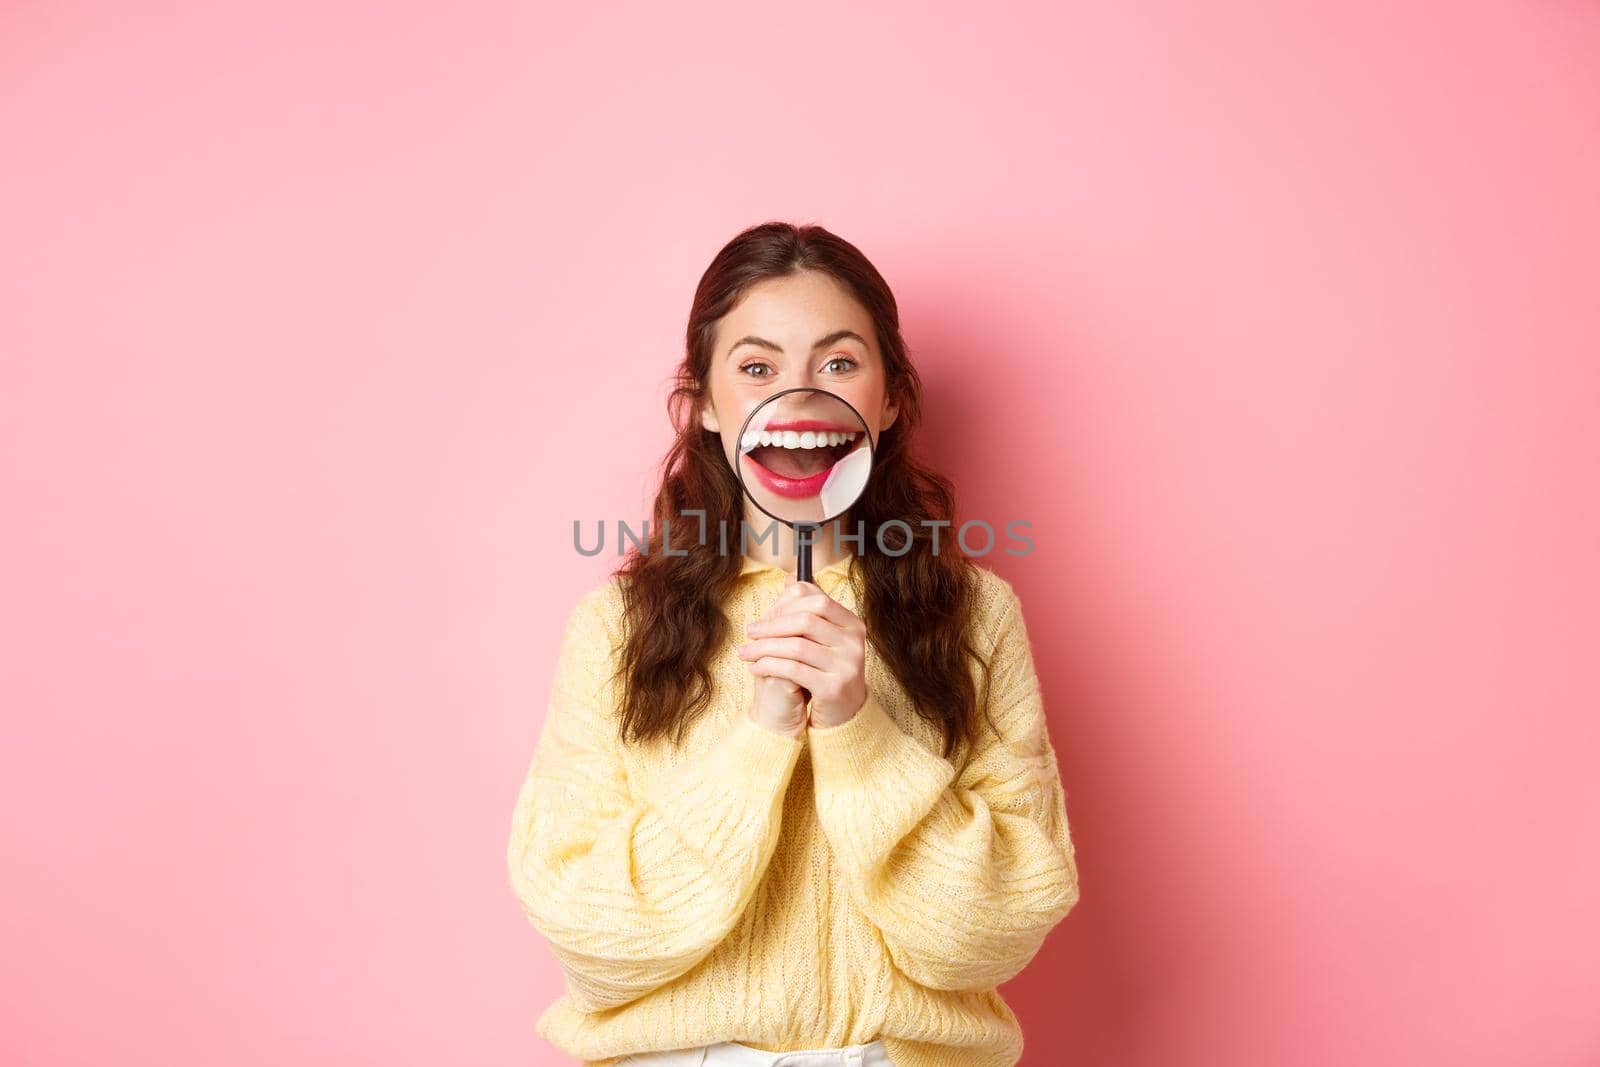 Young smiling woman showing her perfect whitened teeth smile with magnifying glass, promo of dental clinic, stomatology and healthcare concept, standing against pink background.